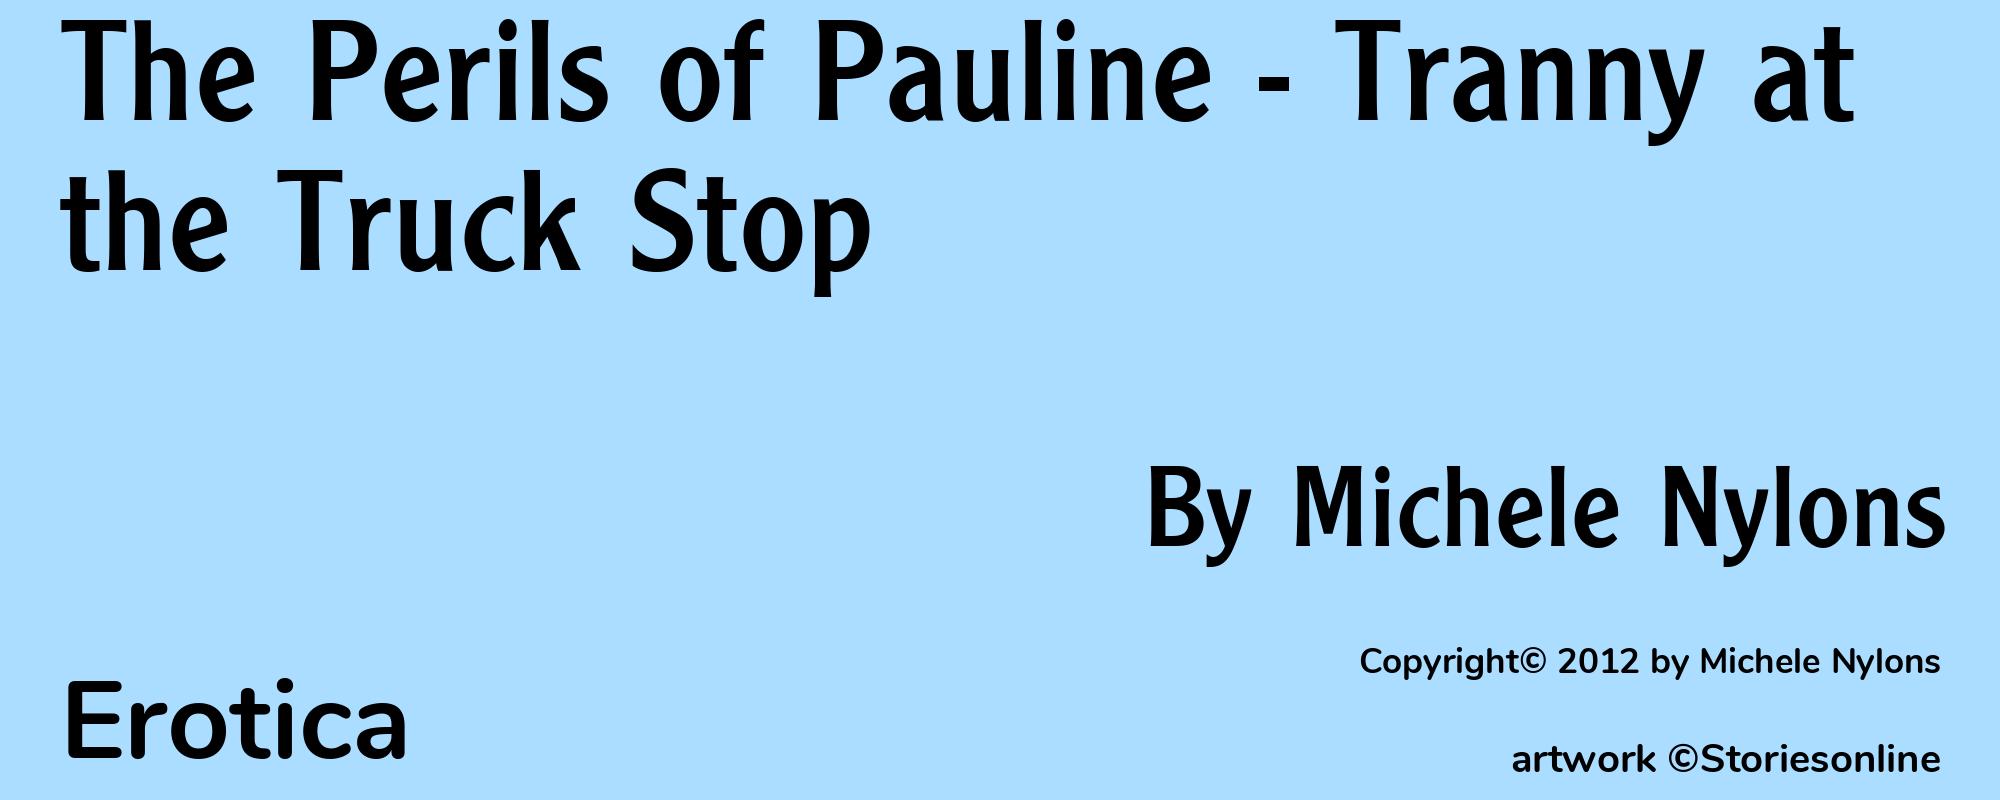 The Perils of Pauline - Tranny at the Truck Stop - Cover